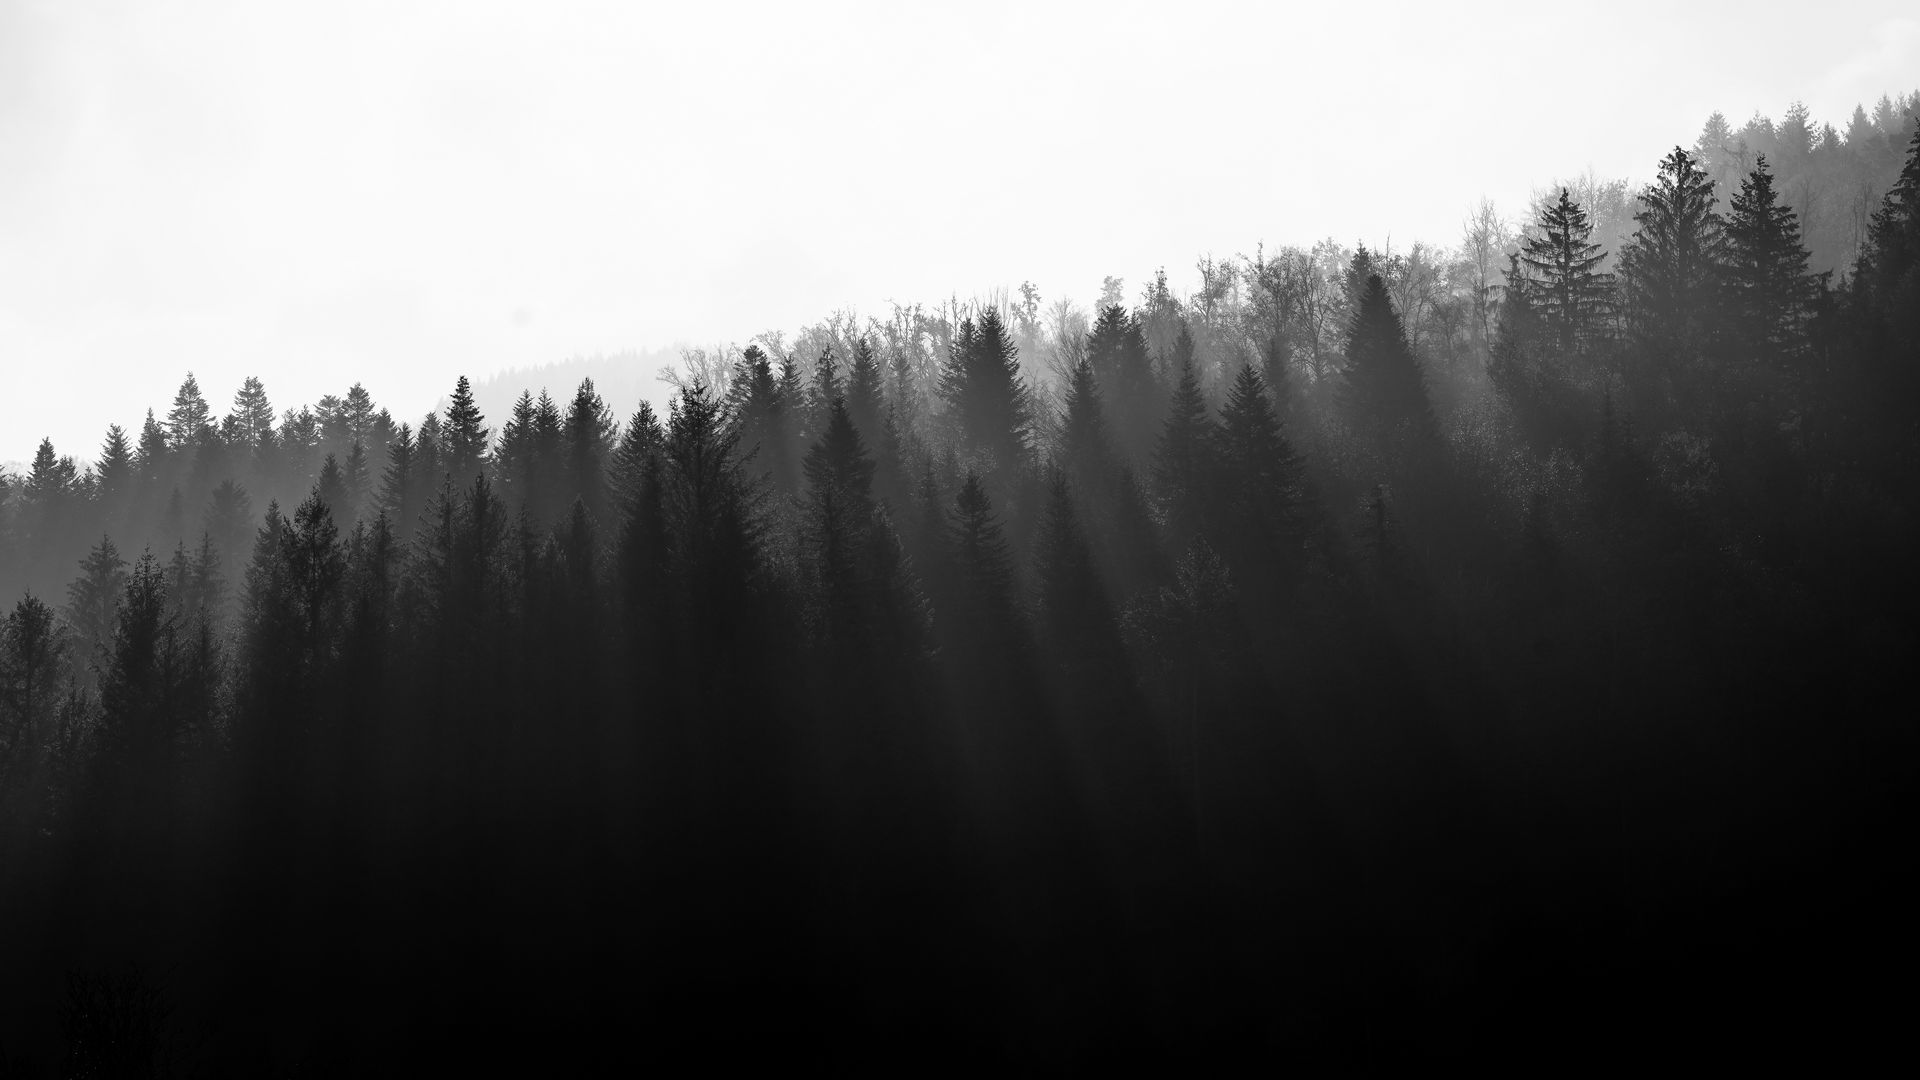 Download wallpaper 1920x1080 forest, trees, light, black and white full ...